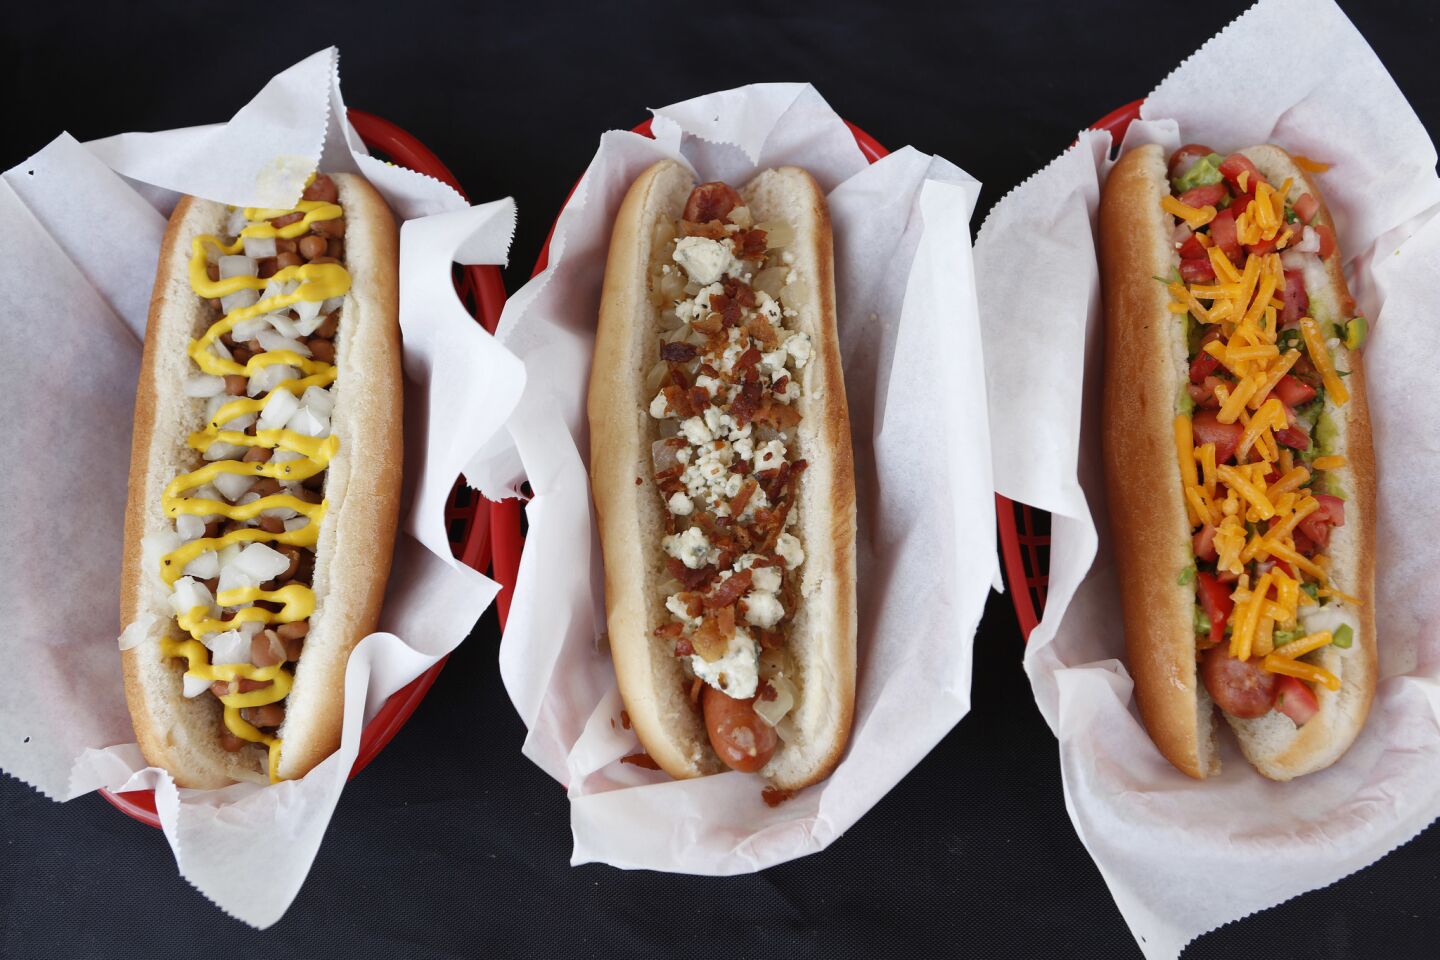 From left, the Boston Celtic, the Blue Dog and the Nacho dog are some of the hot dogs offered at Tail O' the Pup, a truck specializing in hot dogs. The truck is part of the relaunch of the brand, which began in 1946 with a stand selling hot dogs.